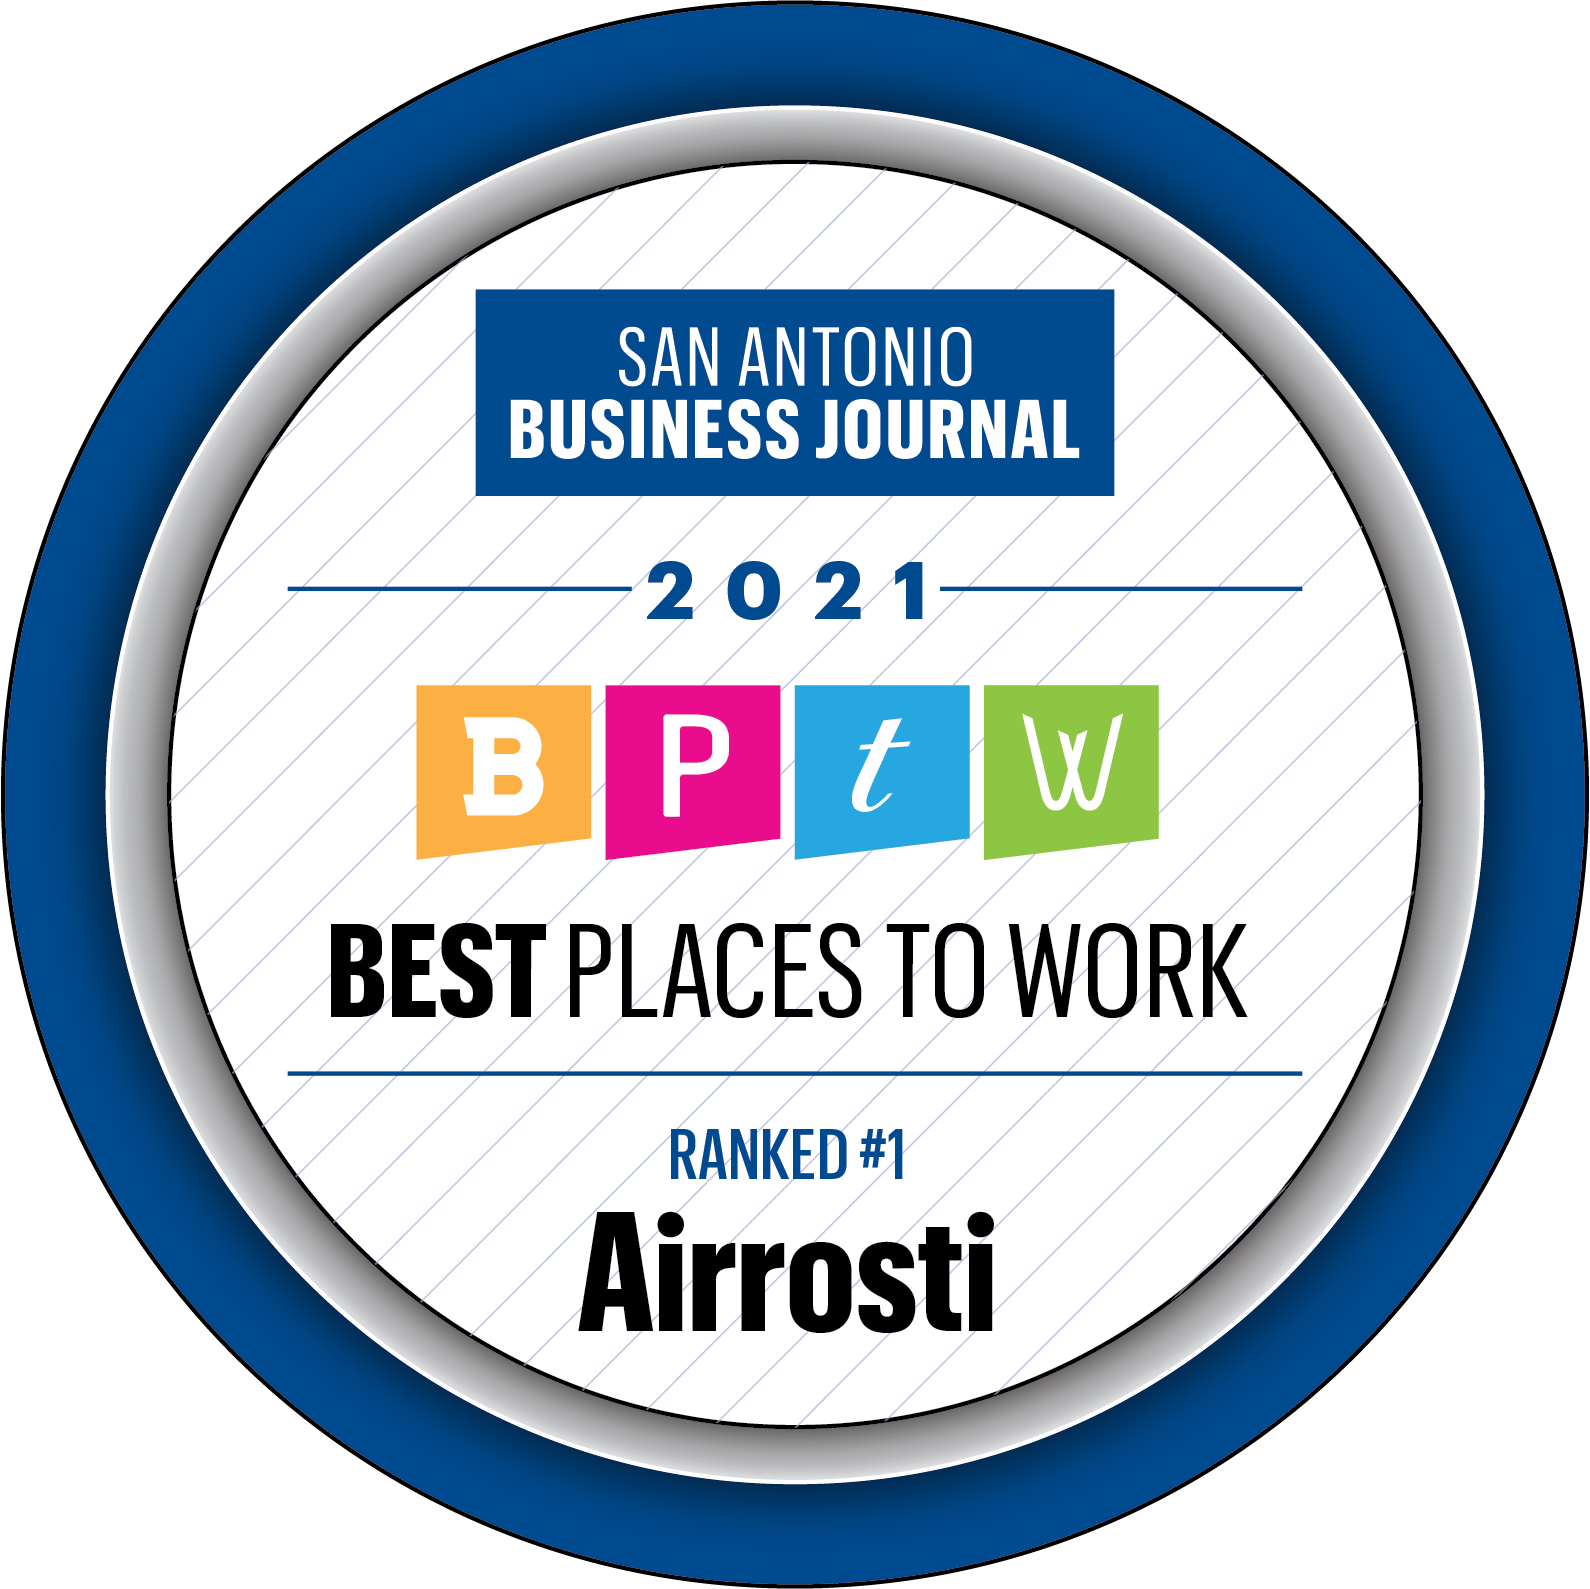 Best Places to Work #1